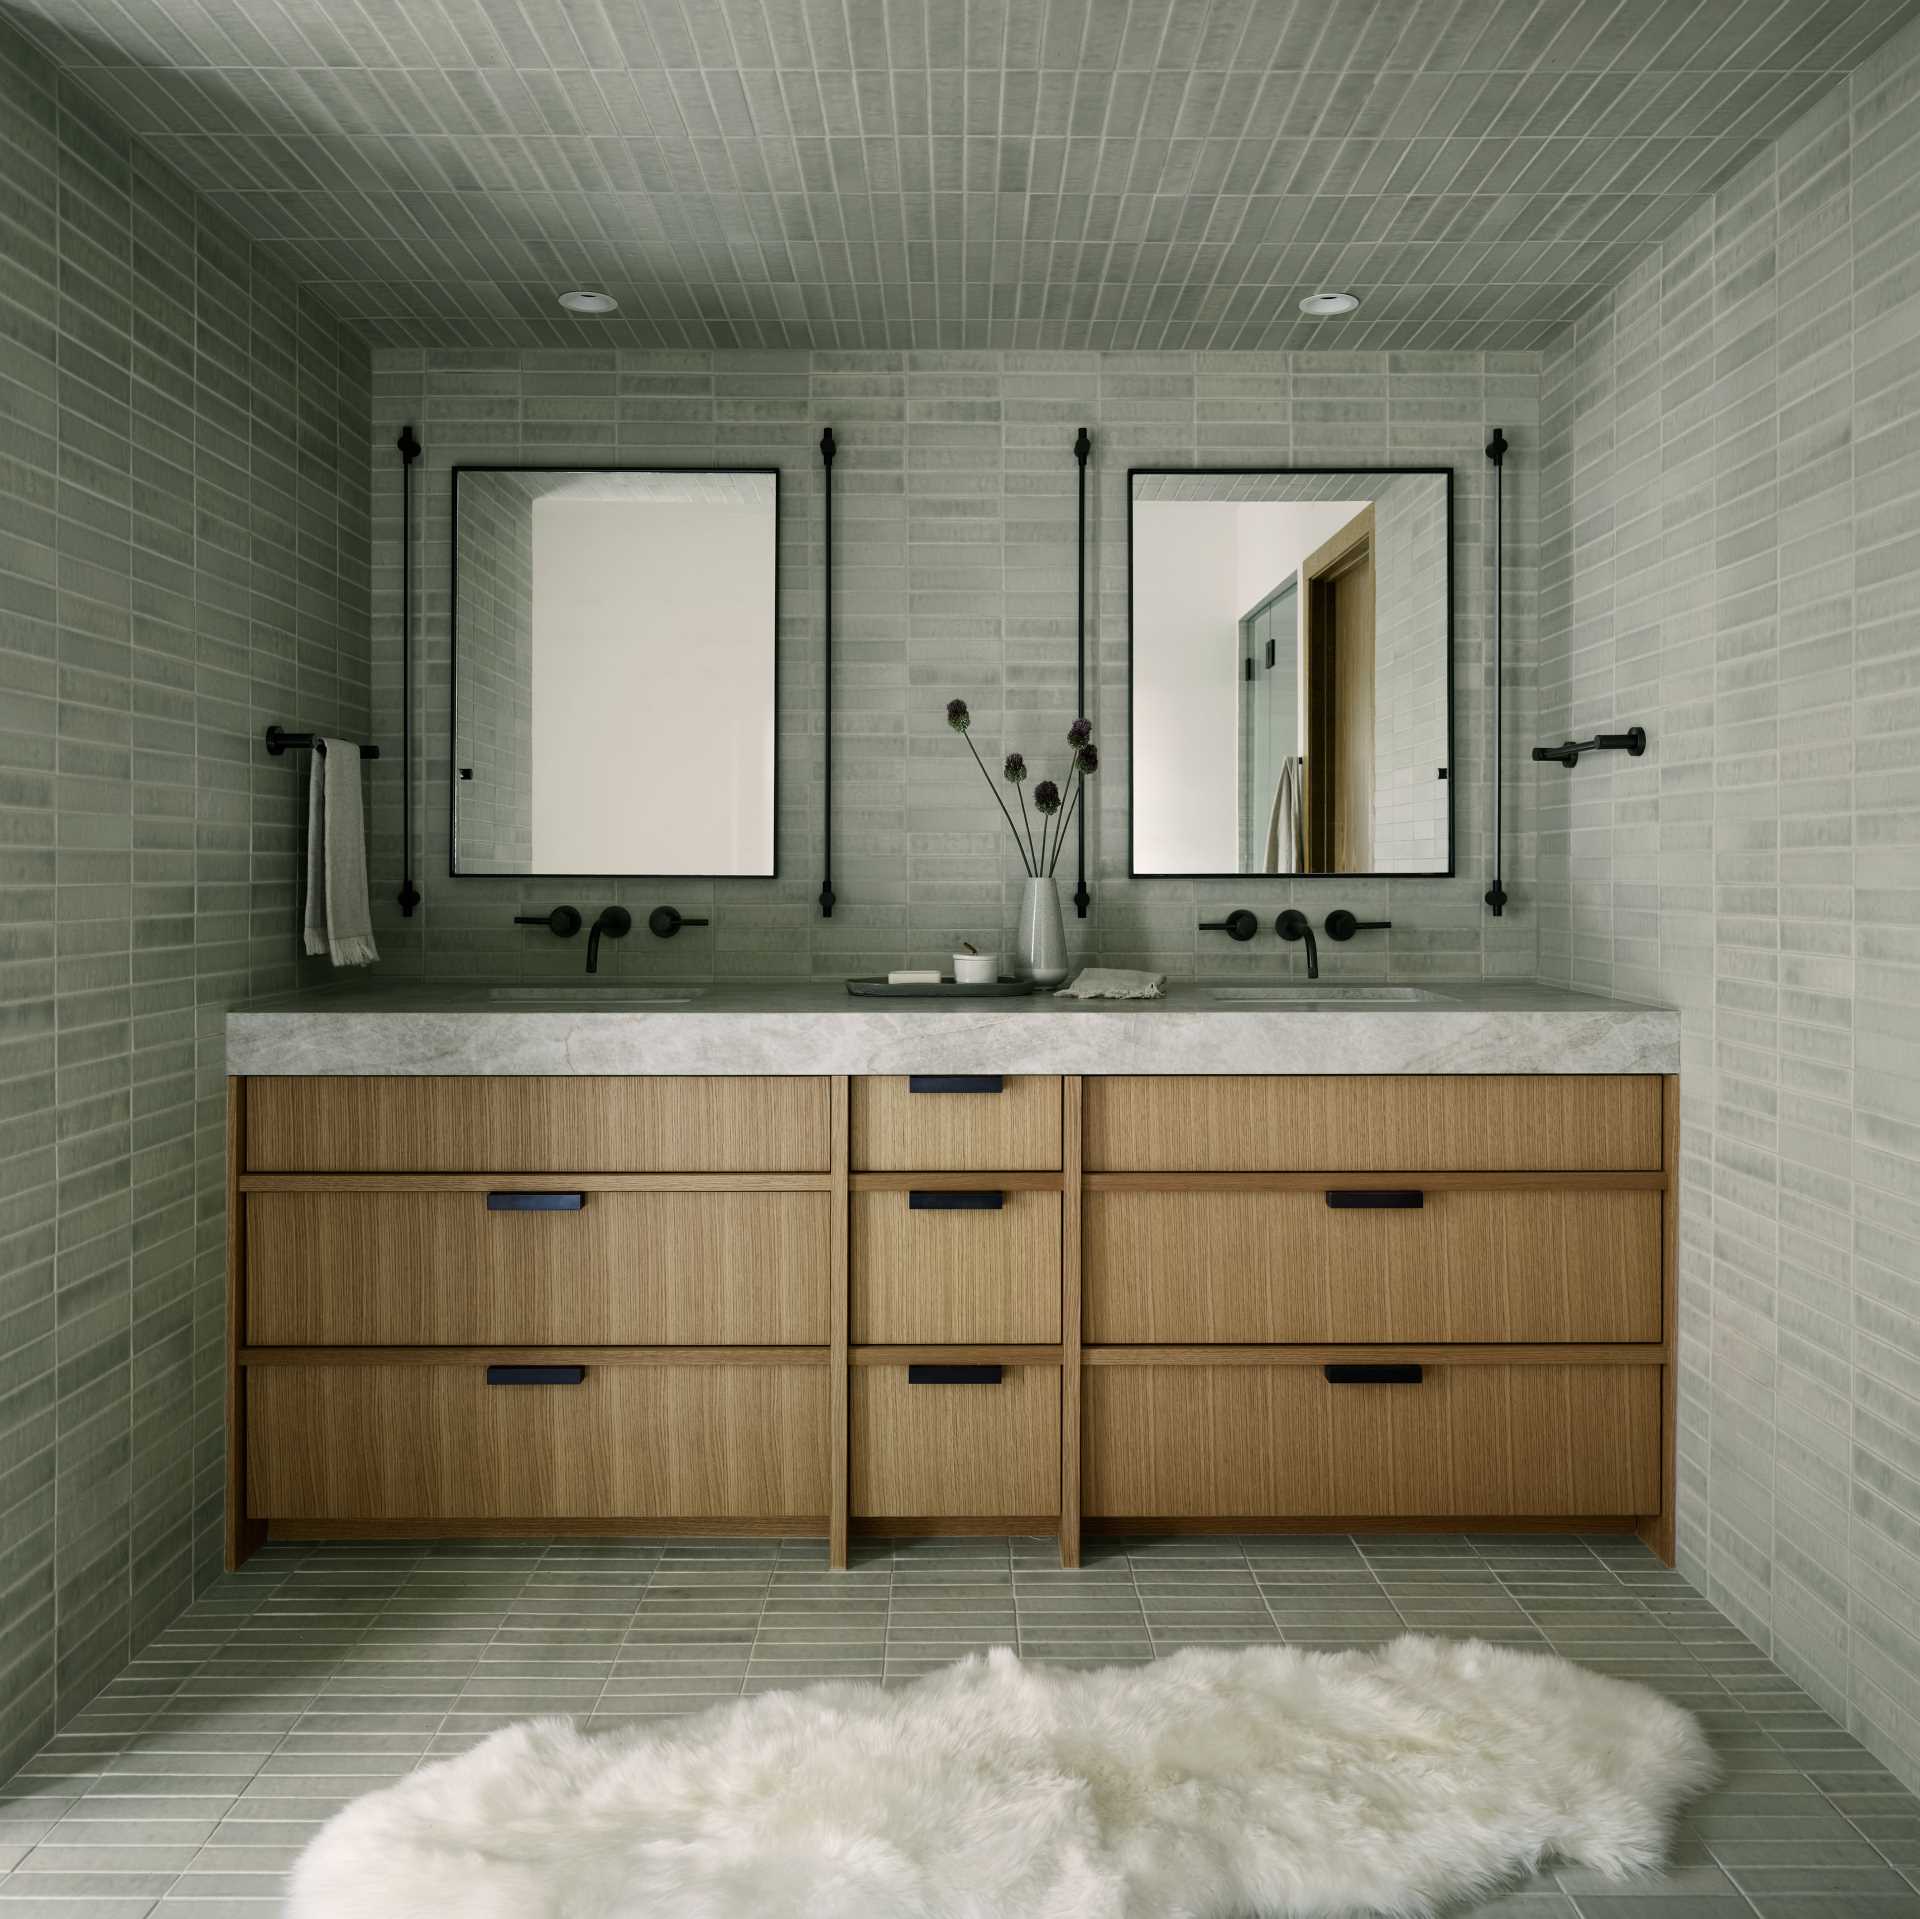 In the en-suite bathroom, tiles cover the walls, floor, and ceiling, while a double wood vanity adds a natural element to the space.